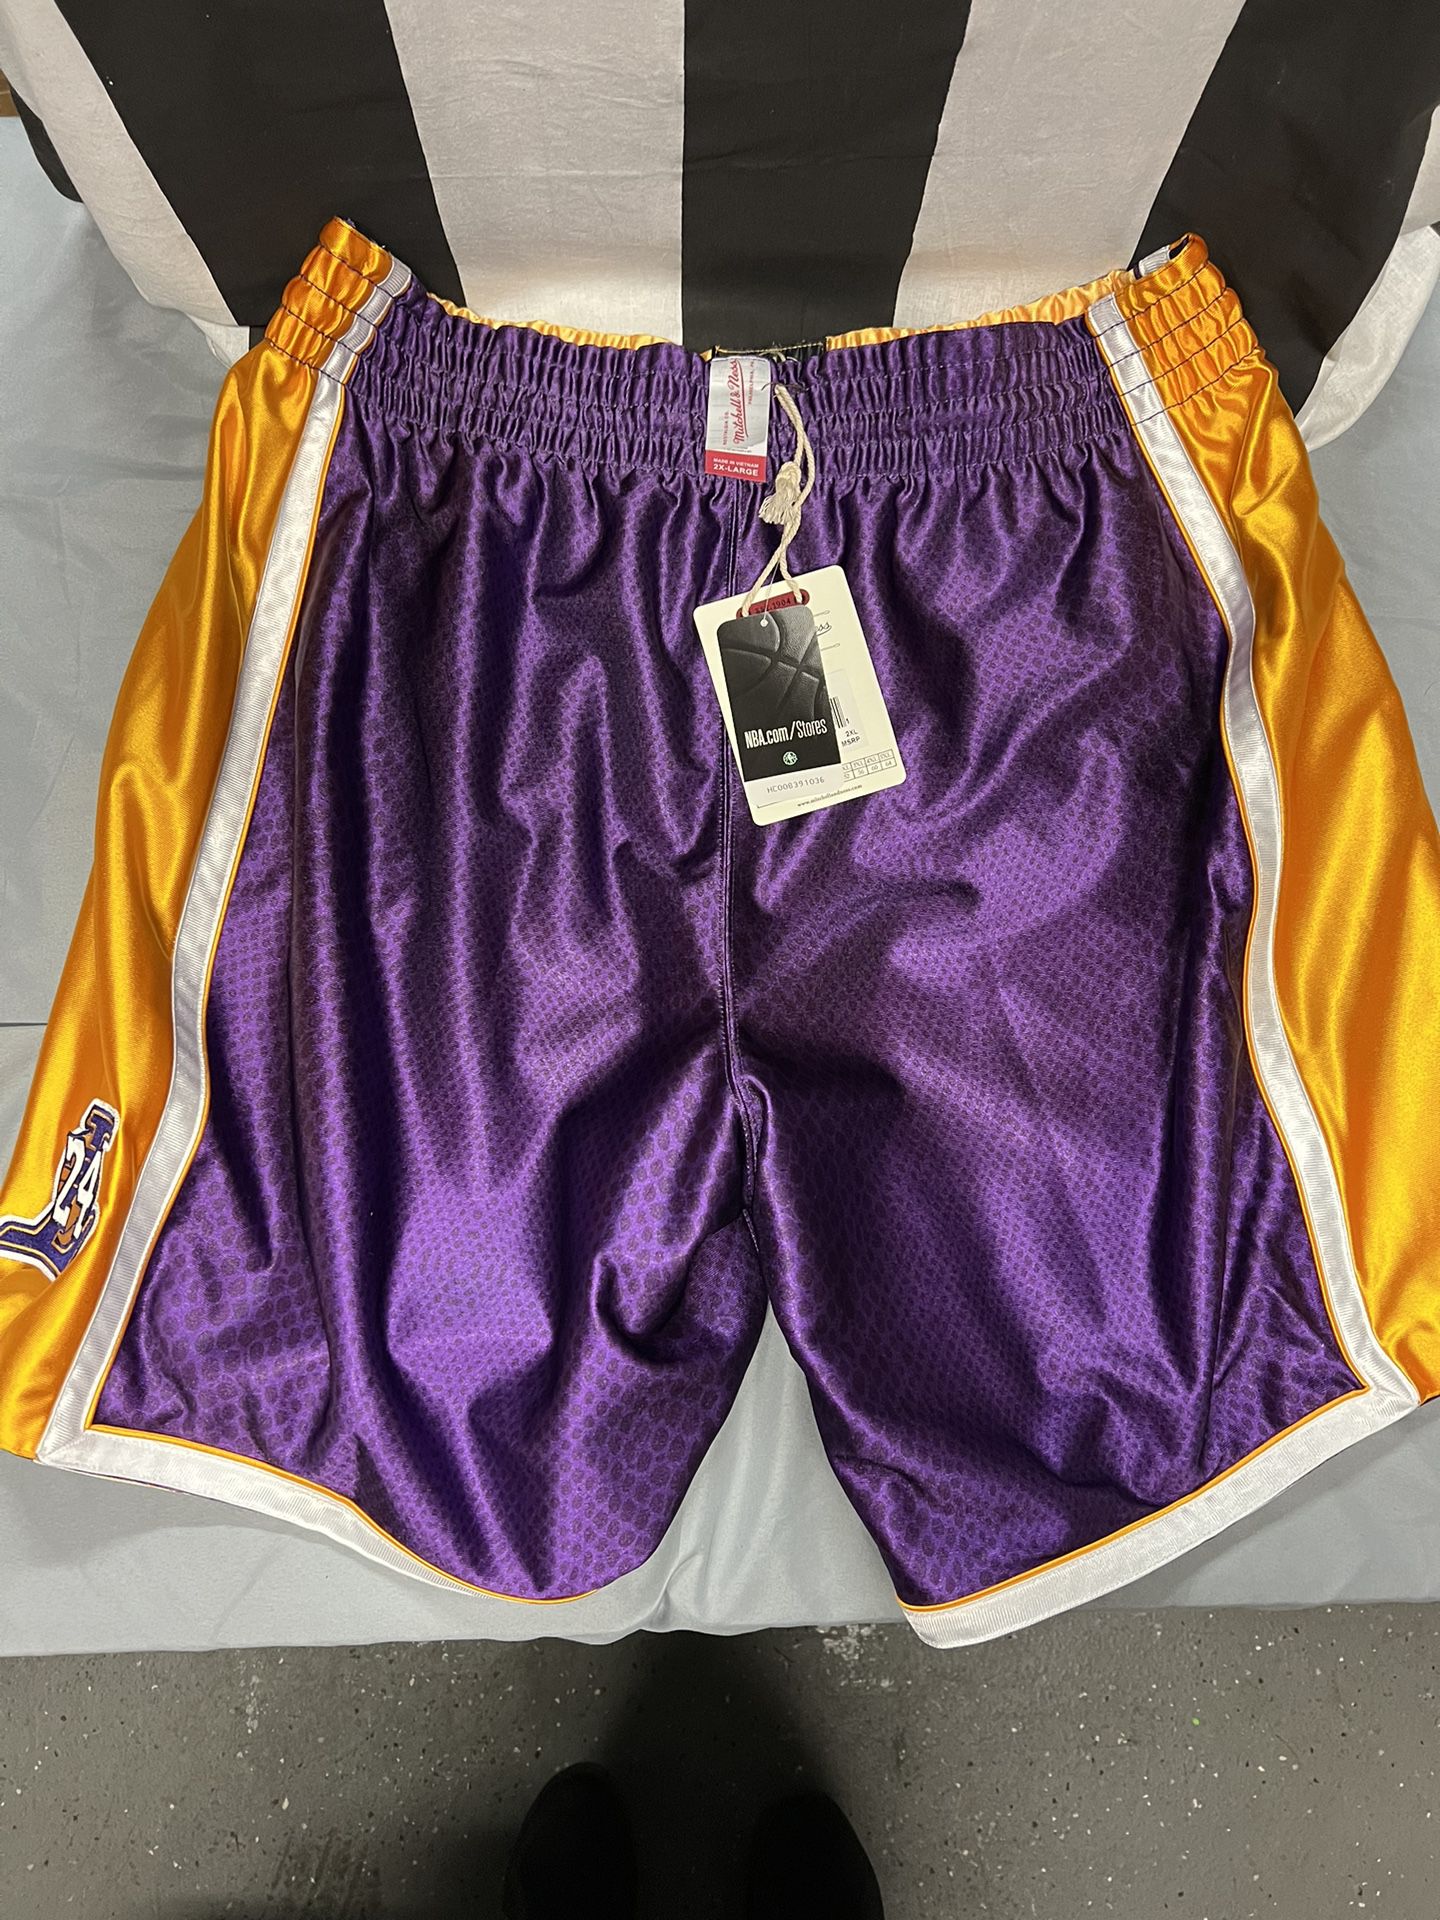 Kobe Bryant Lakers Shorts for Sale in Lakewood, CA - OfferUp